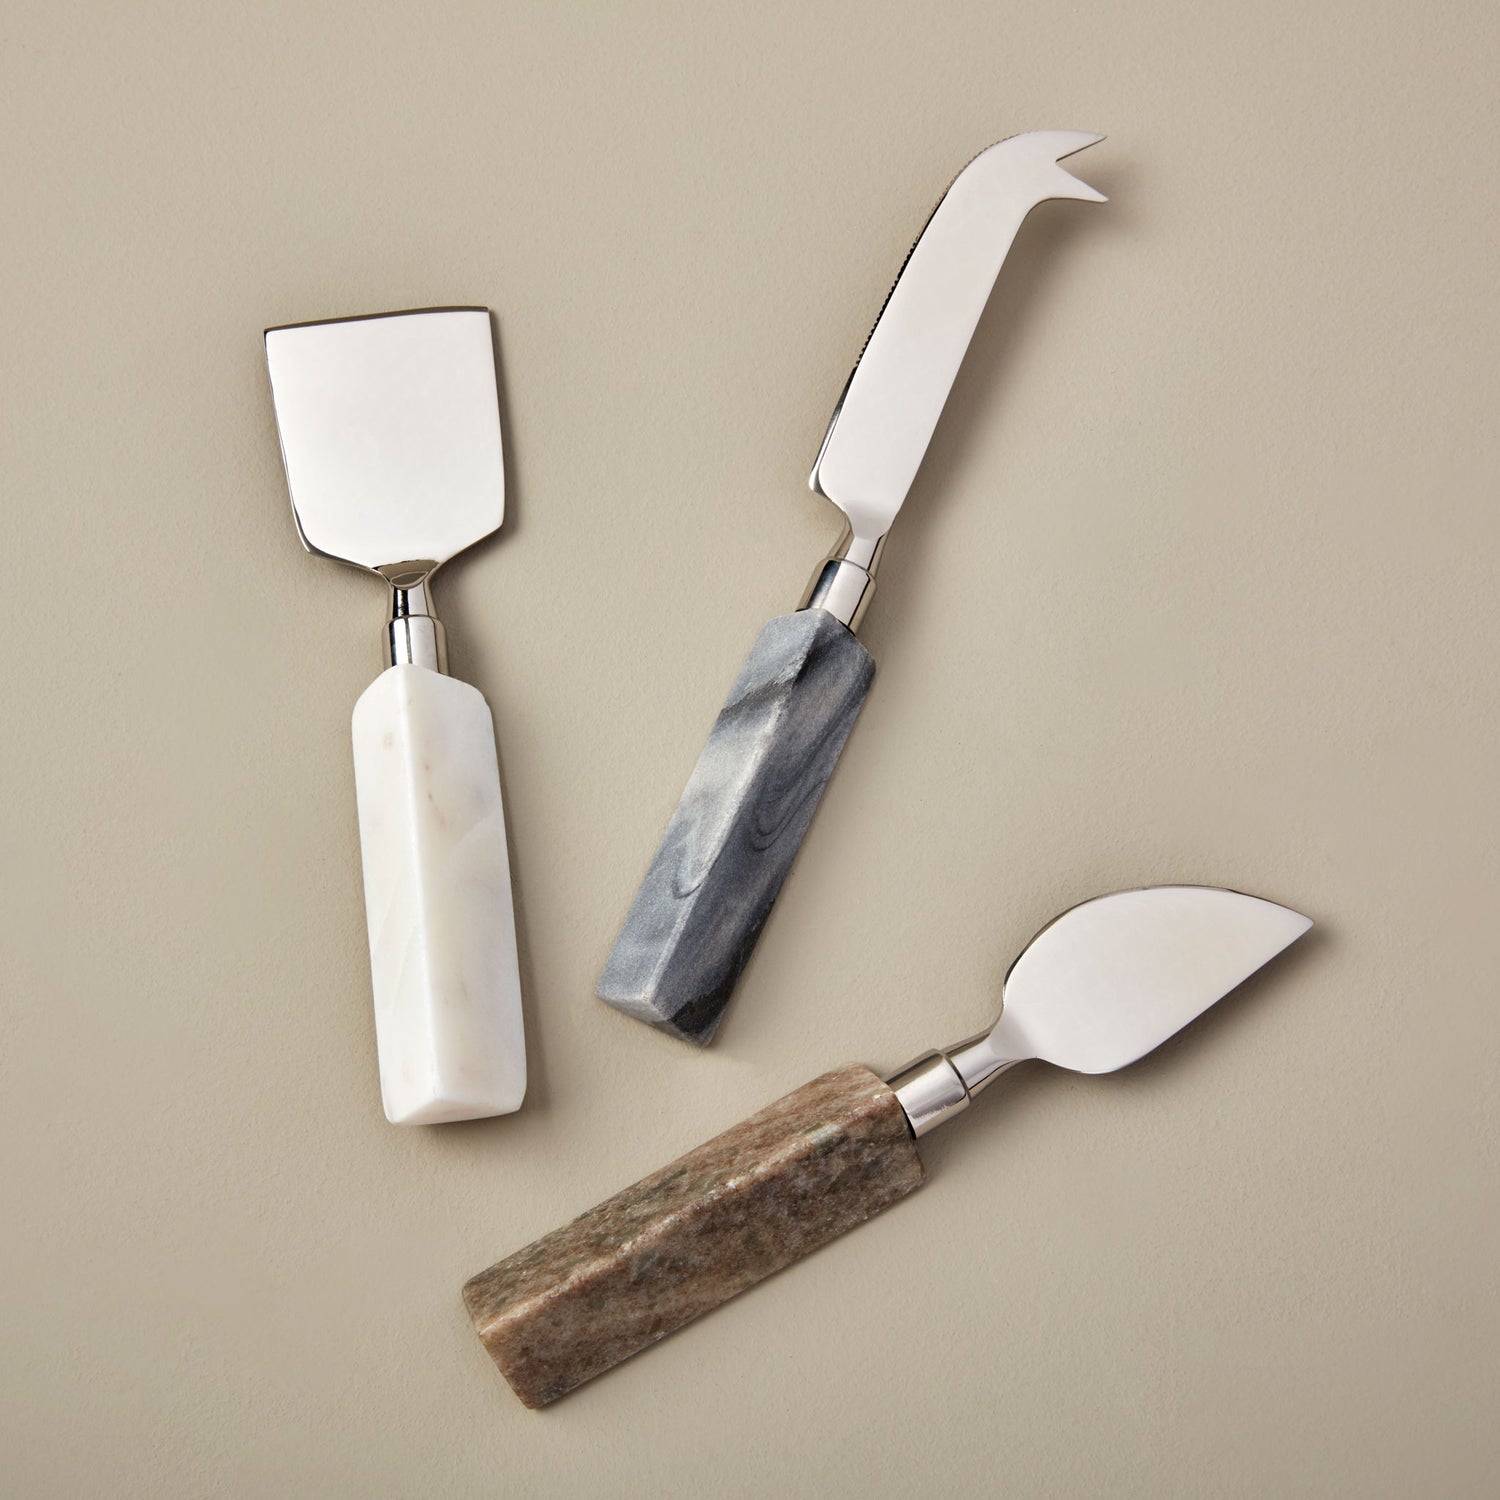 Marble Cheese Knives - Set of 3, Cheese Tools